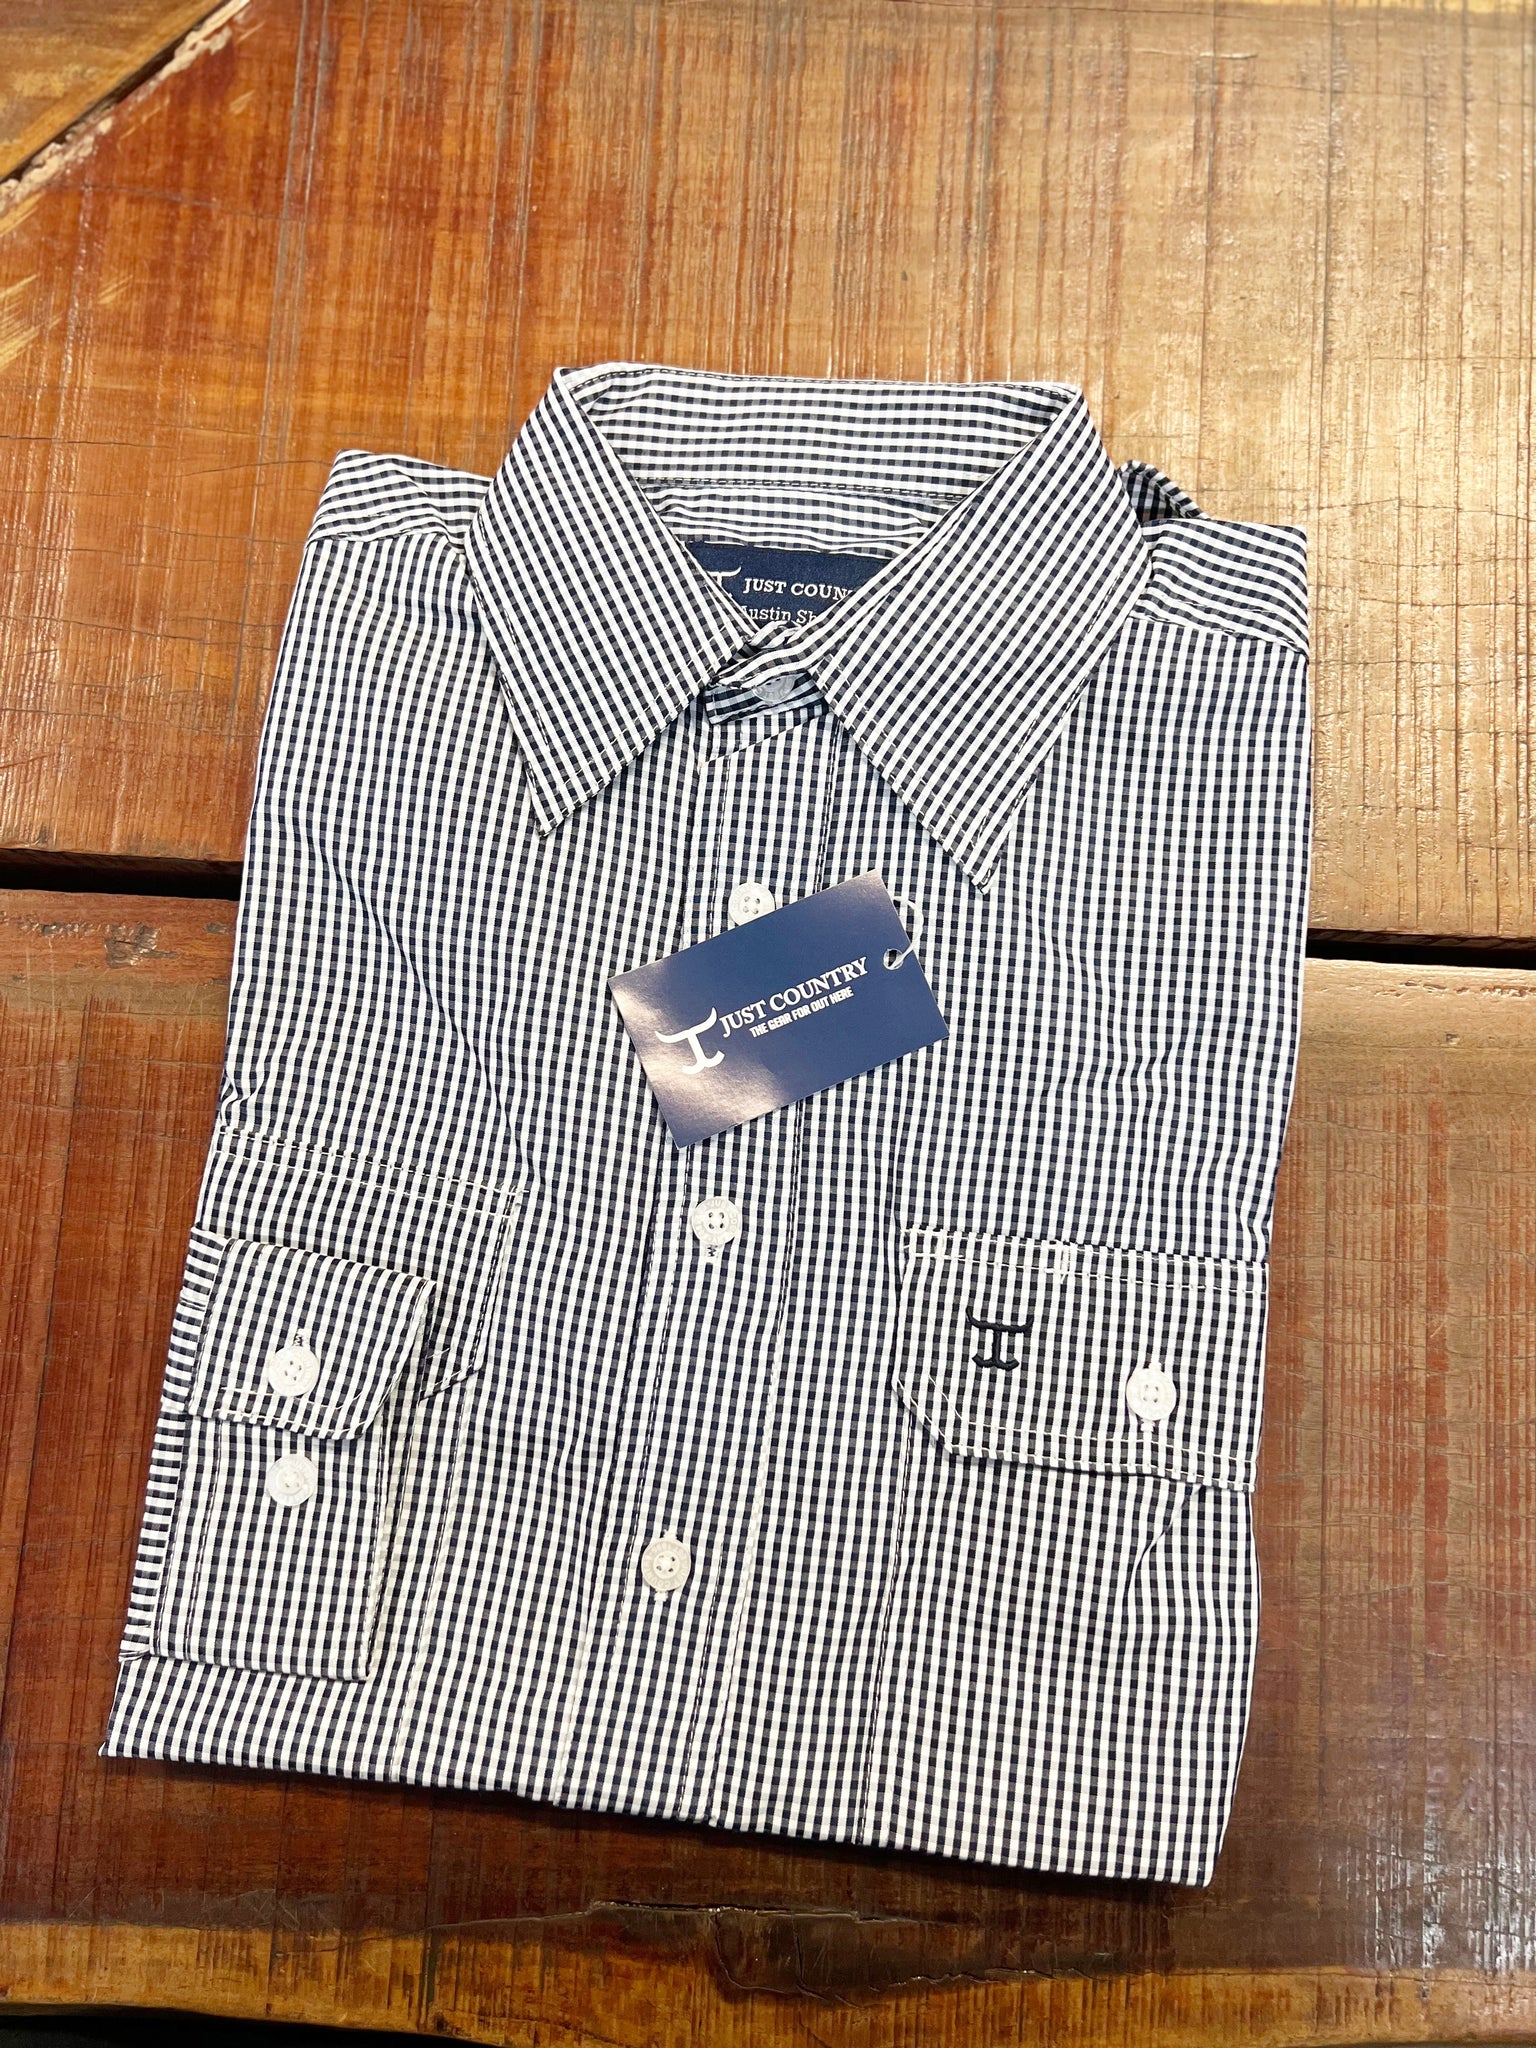 MWLS2306 Just Country Mens Austin Full Button Print Workshirt Navy/White Mini Check